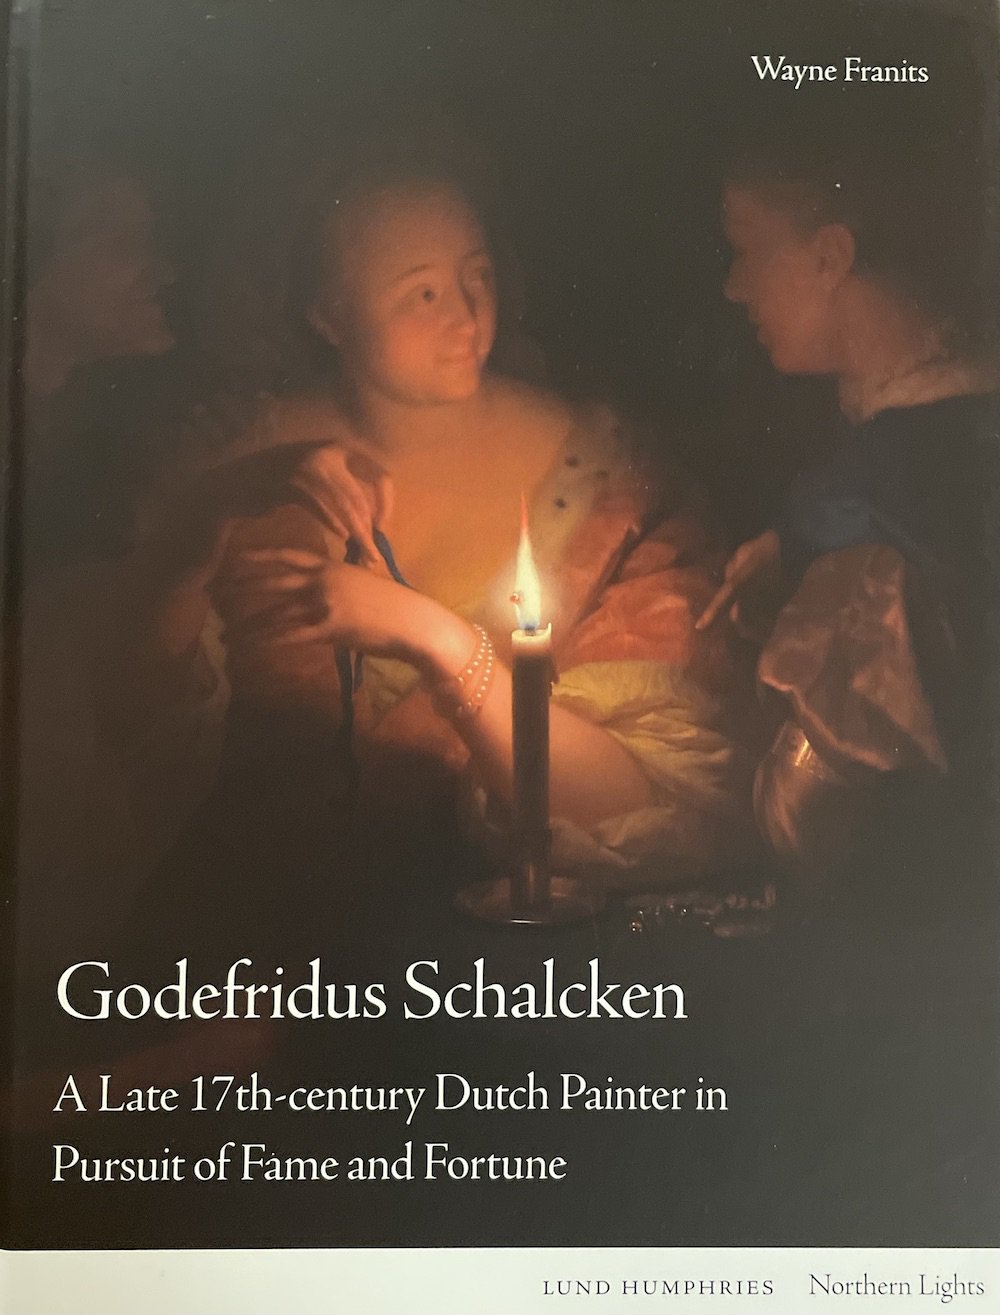 Godefridus Schalcken: A Late 17th-century Dutch Painter in Pursuit of Fame and Fortune